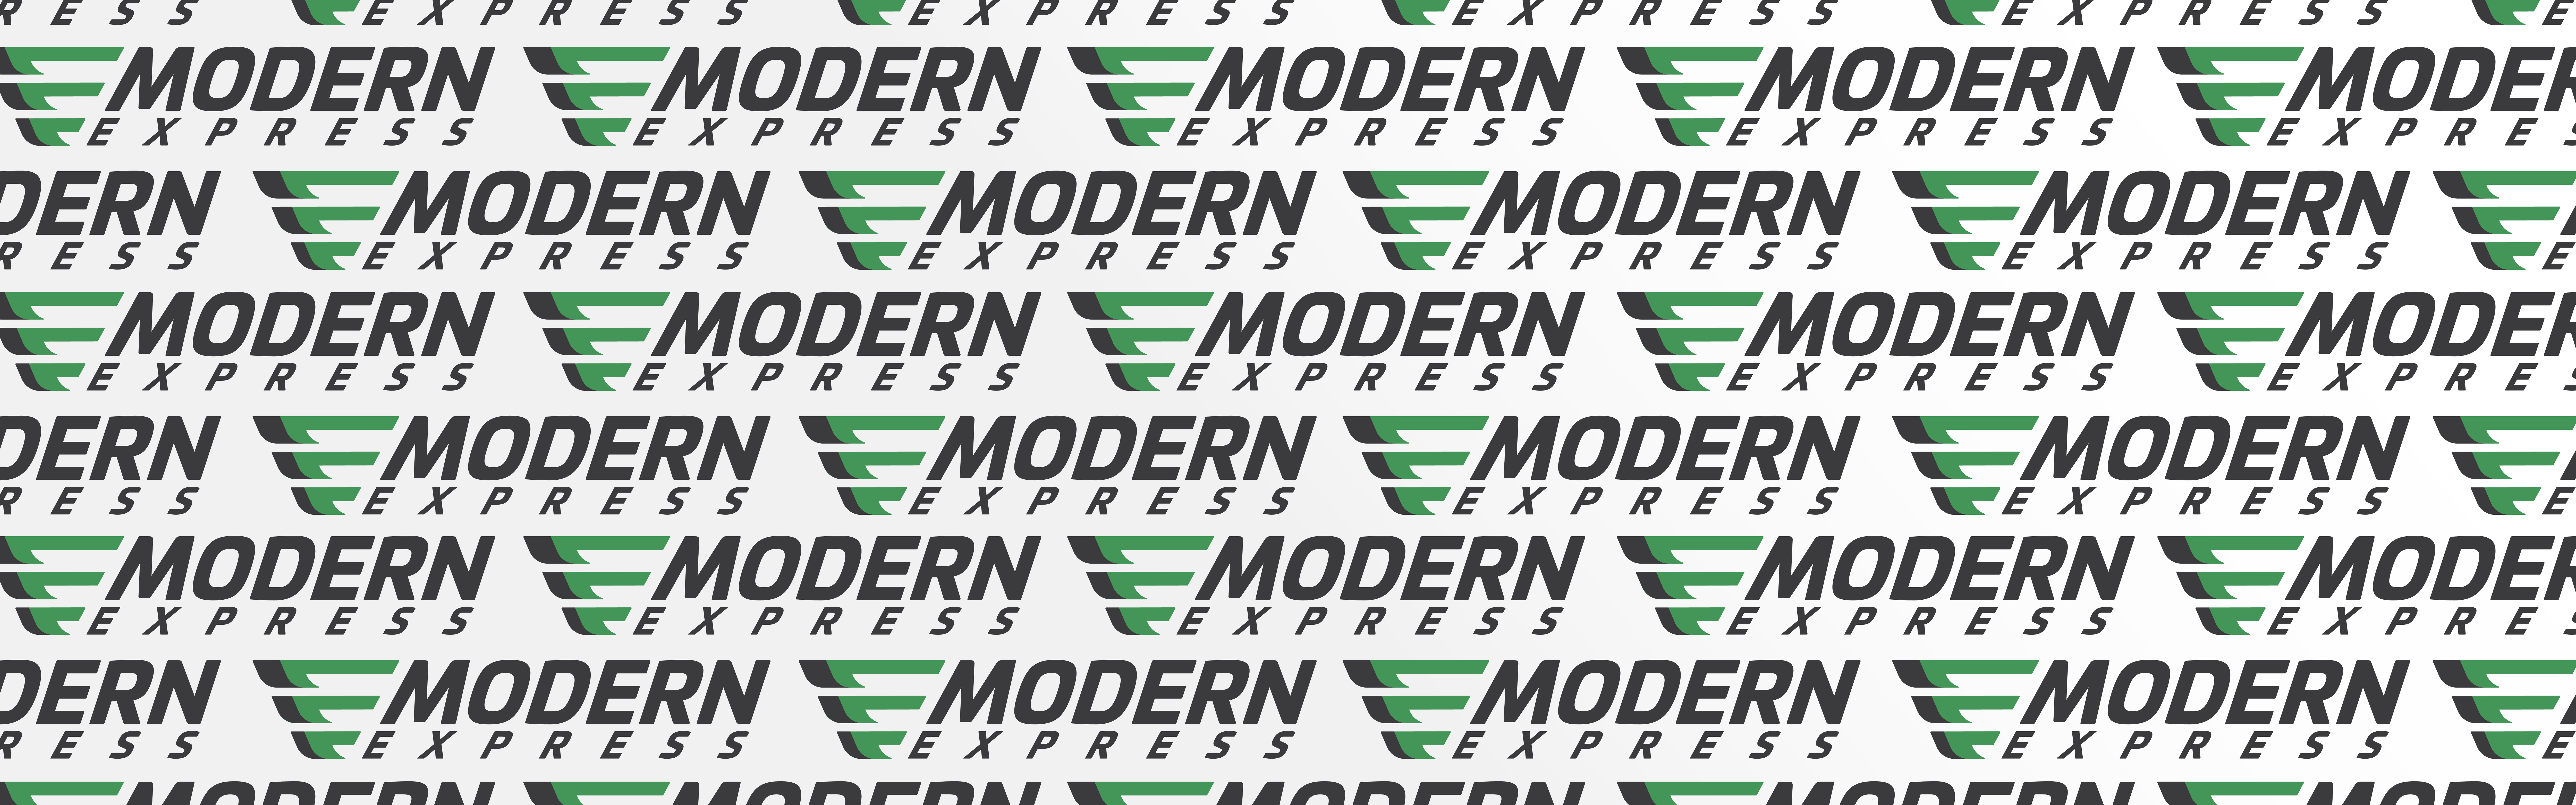 A repeated pattern of the 'Modern Express' logo consisting of the words 'MODERN EXPRESS' in capital letters next to a stylized green and blue chevron design on a white background.